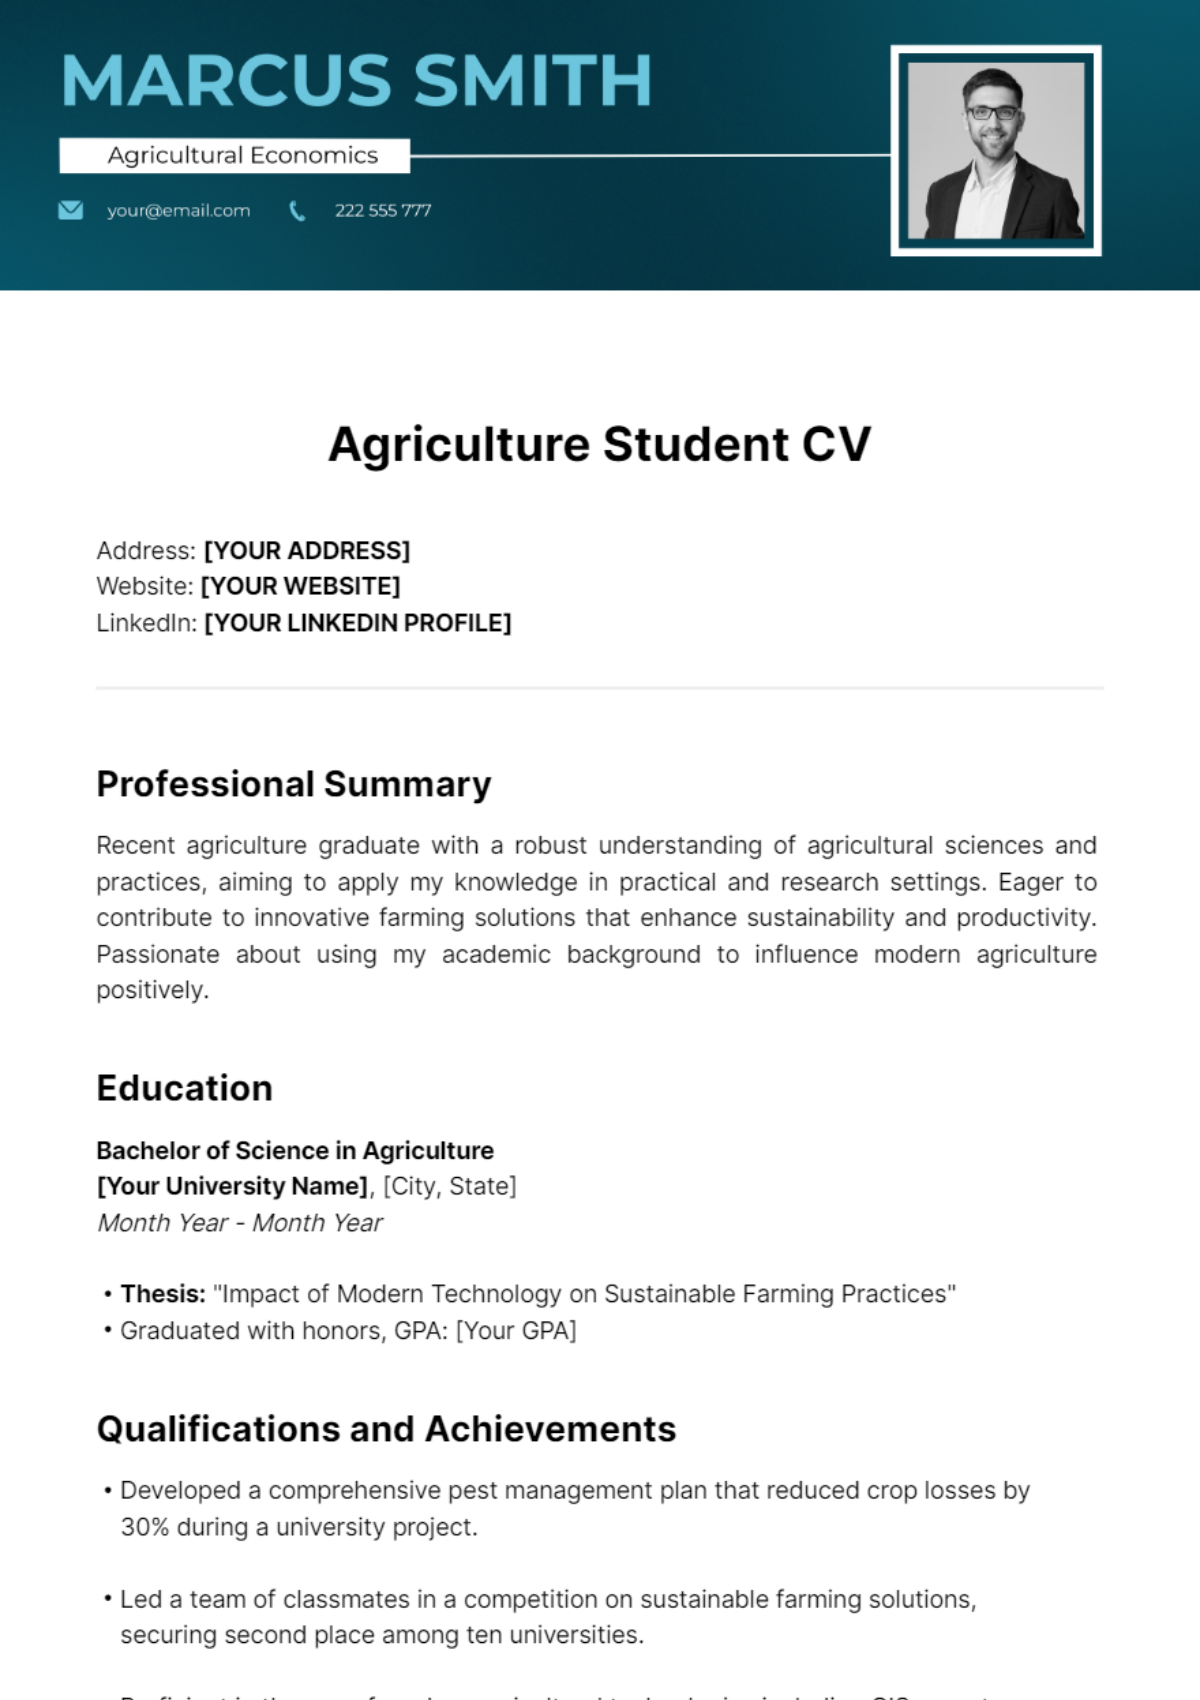 Agriculture Student CV Template